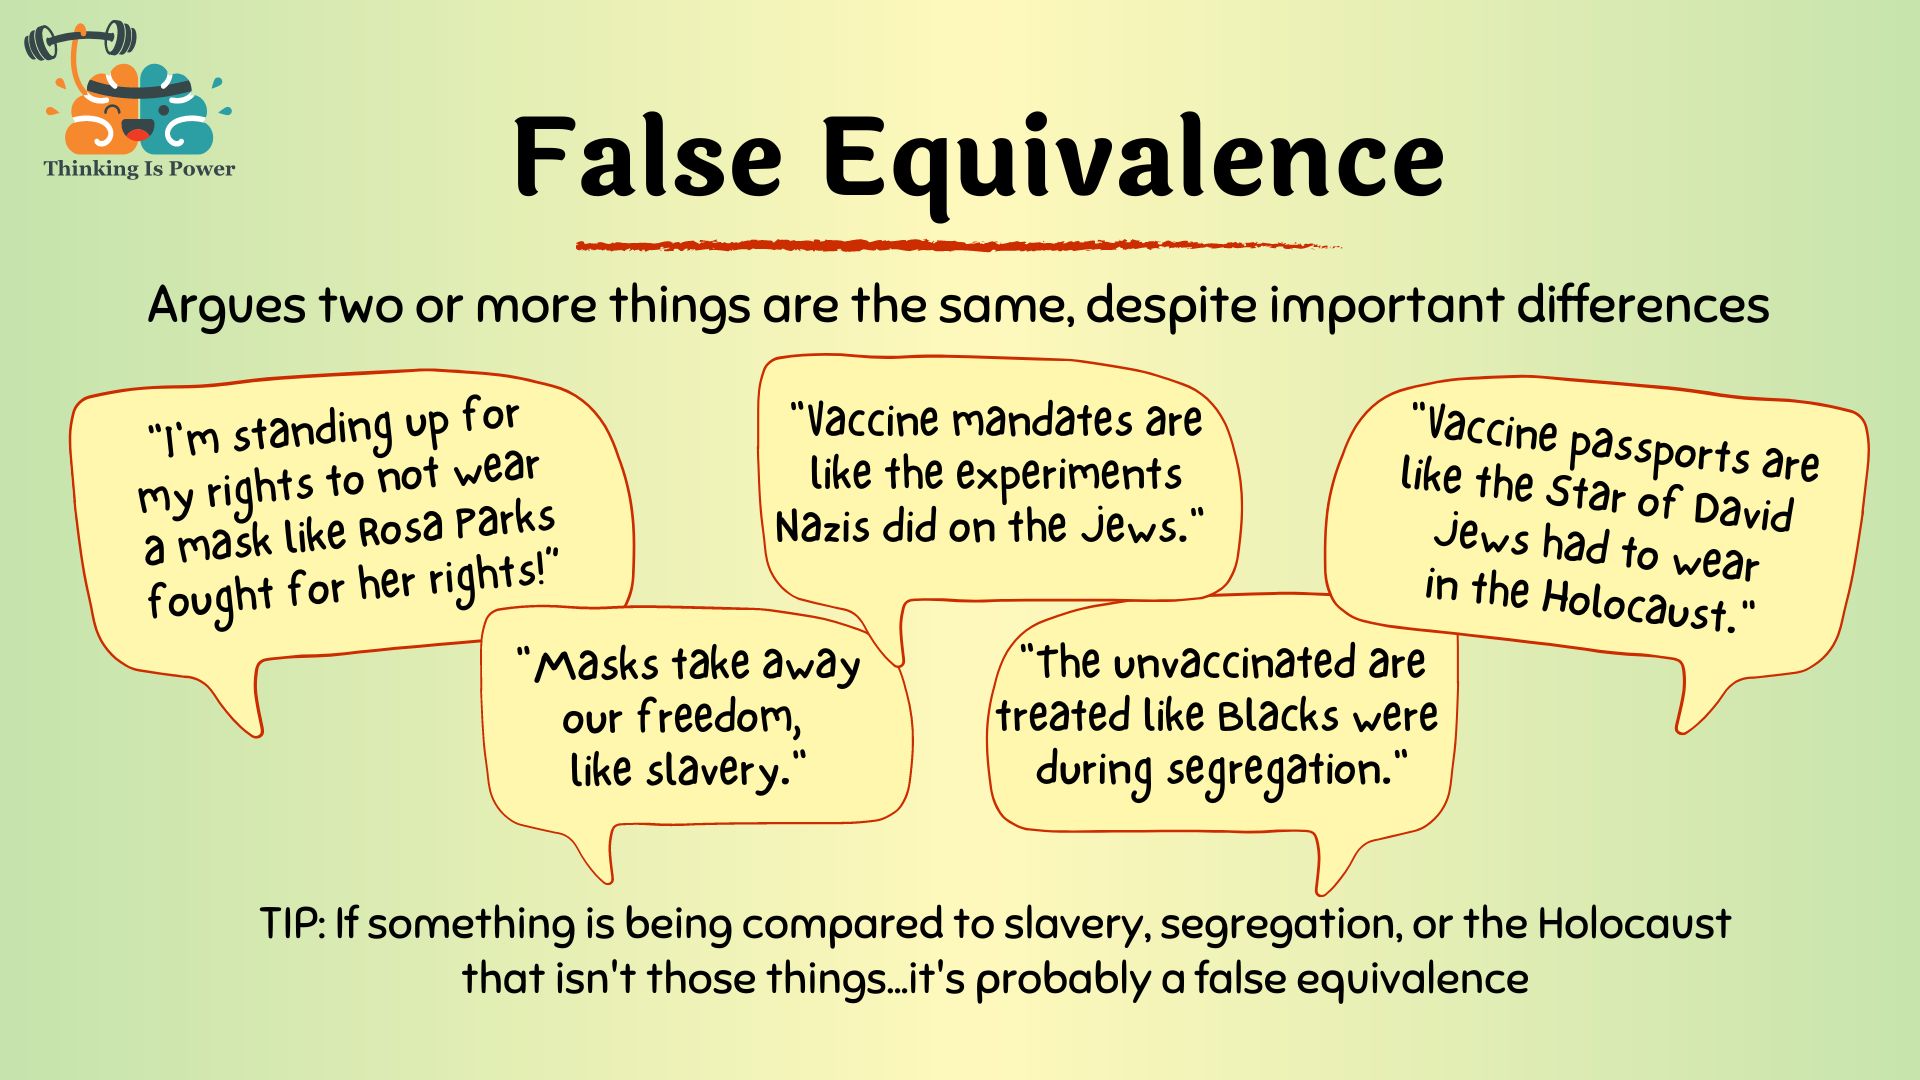 False equivalence fallacy argues two or more things are the same, despite having important differences. Examples are related to COVID, vaccines, and masks being compared to slavery, segregation, Nazis, or the Holocaust.